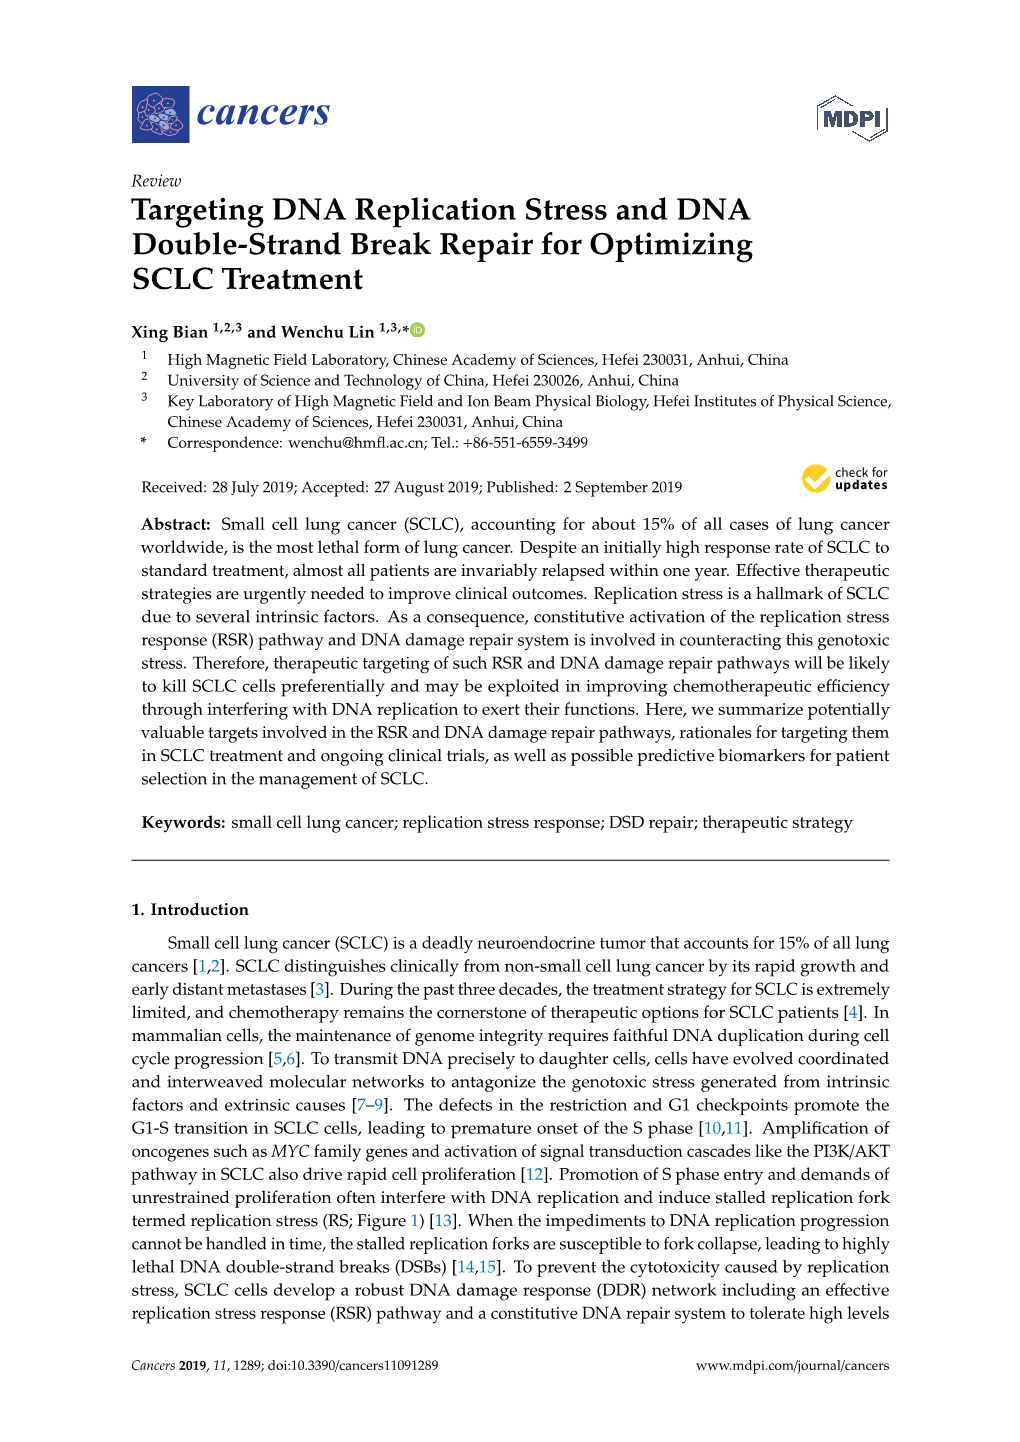 Targeting DNA Replication Stress and DNA Double-Strand Break Repair for Optimizing SCLC Treatment